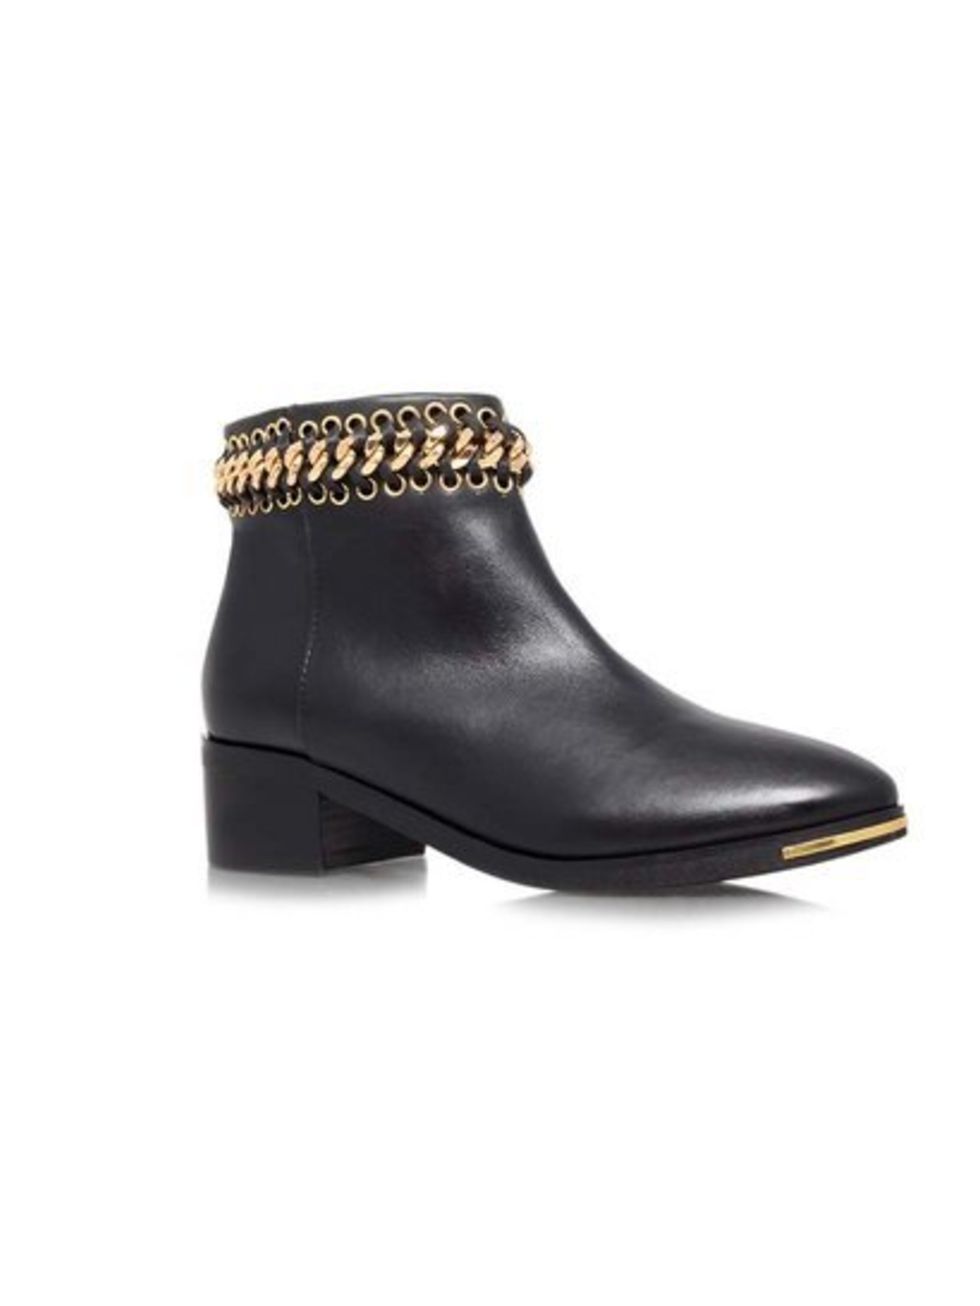 Chain Gang. Leather boots, £160 from Kurt Geiger